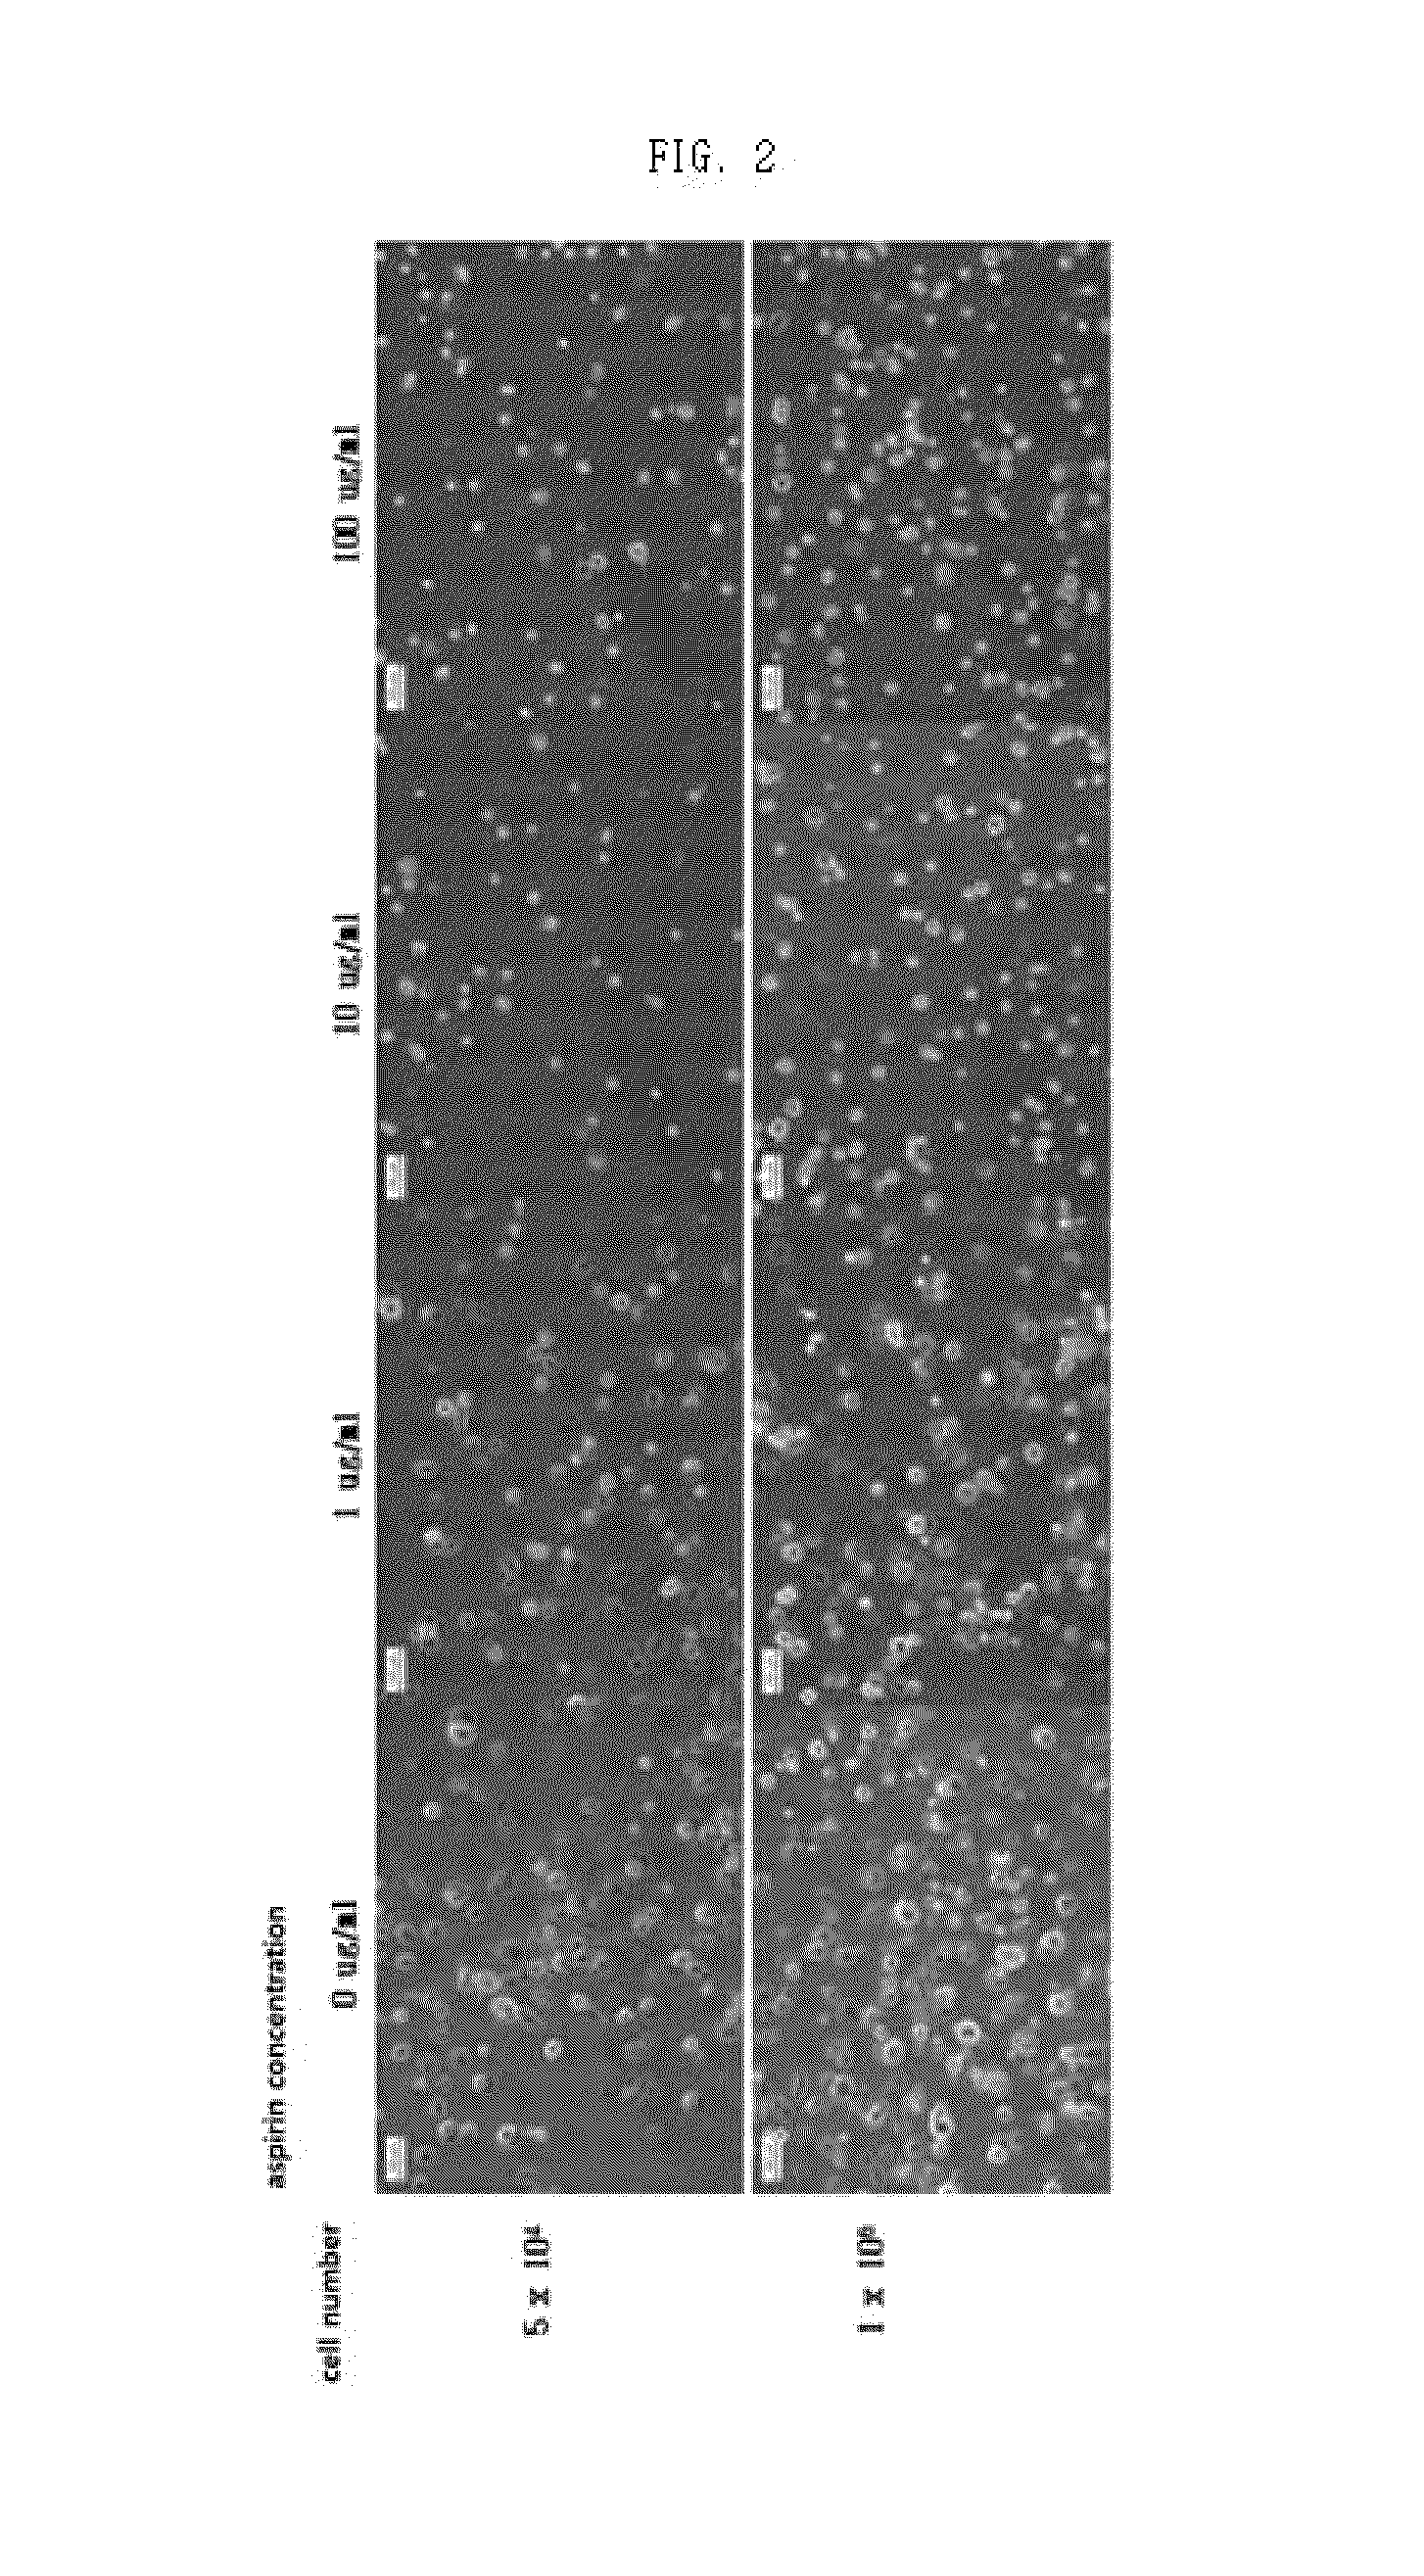 Method and composition for preventing stem cell disruption and aggregation